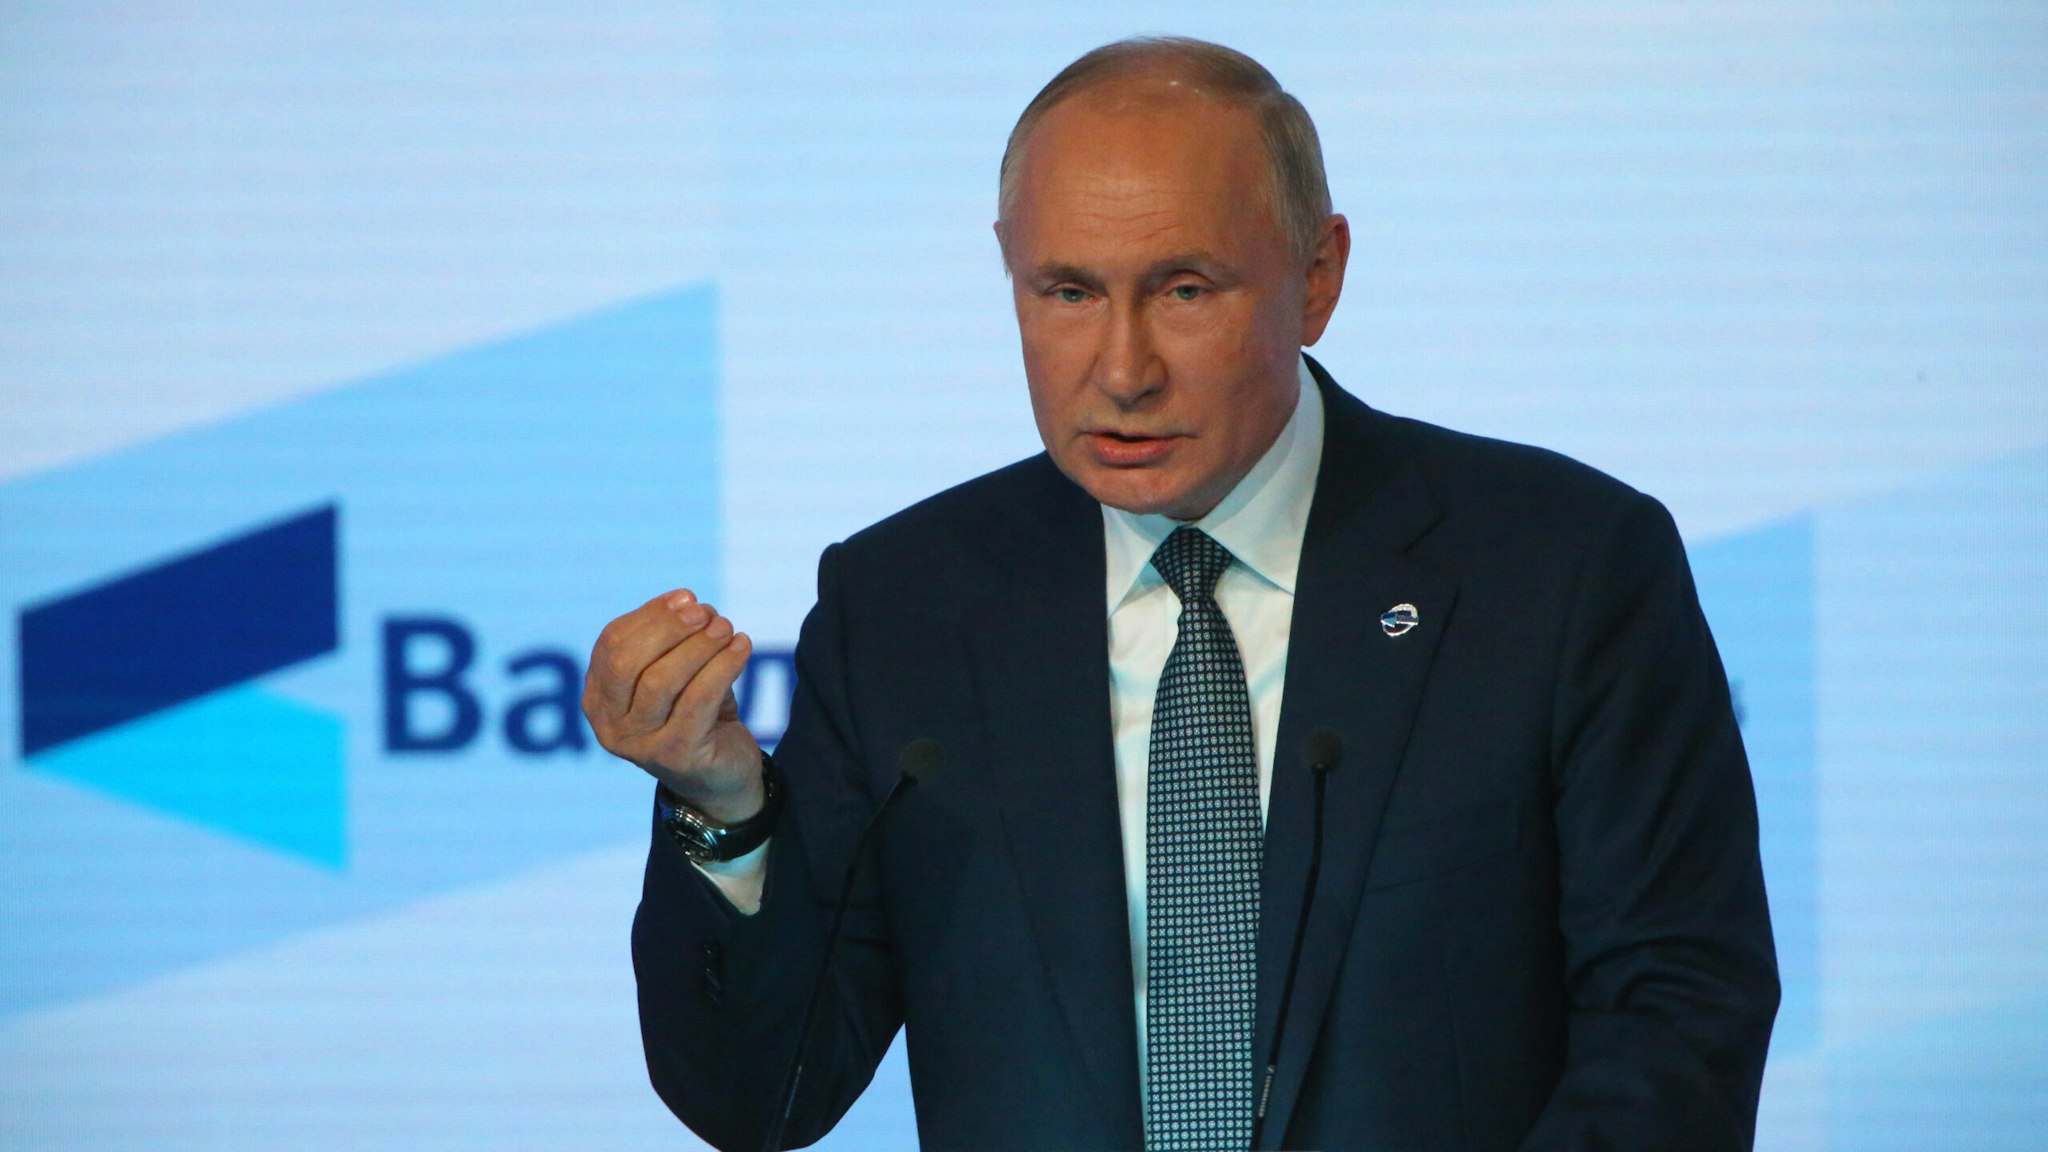 SOCHI, RUSSIA - OCTOBER 21 (RUSSIA OUT): Russian President Vladimir Putin attends the Valdai Discussion Club's plenary meeting, on October 21, 2021, in Sochi, Russia. Vladimir Putin took part in the annual meeting of political scientists on foreign policy held in the Black Sea resort of Sochi.